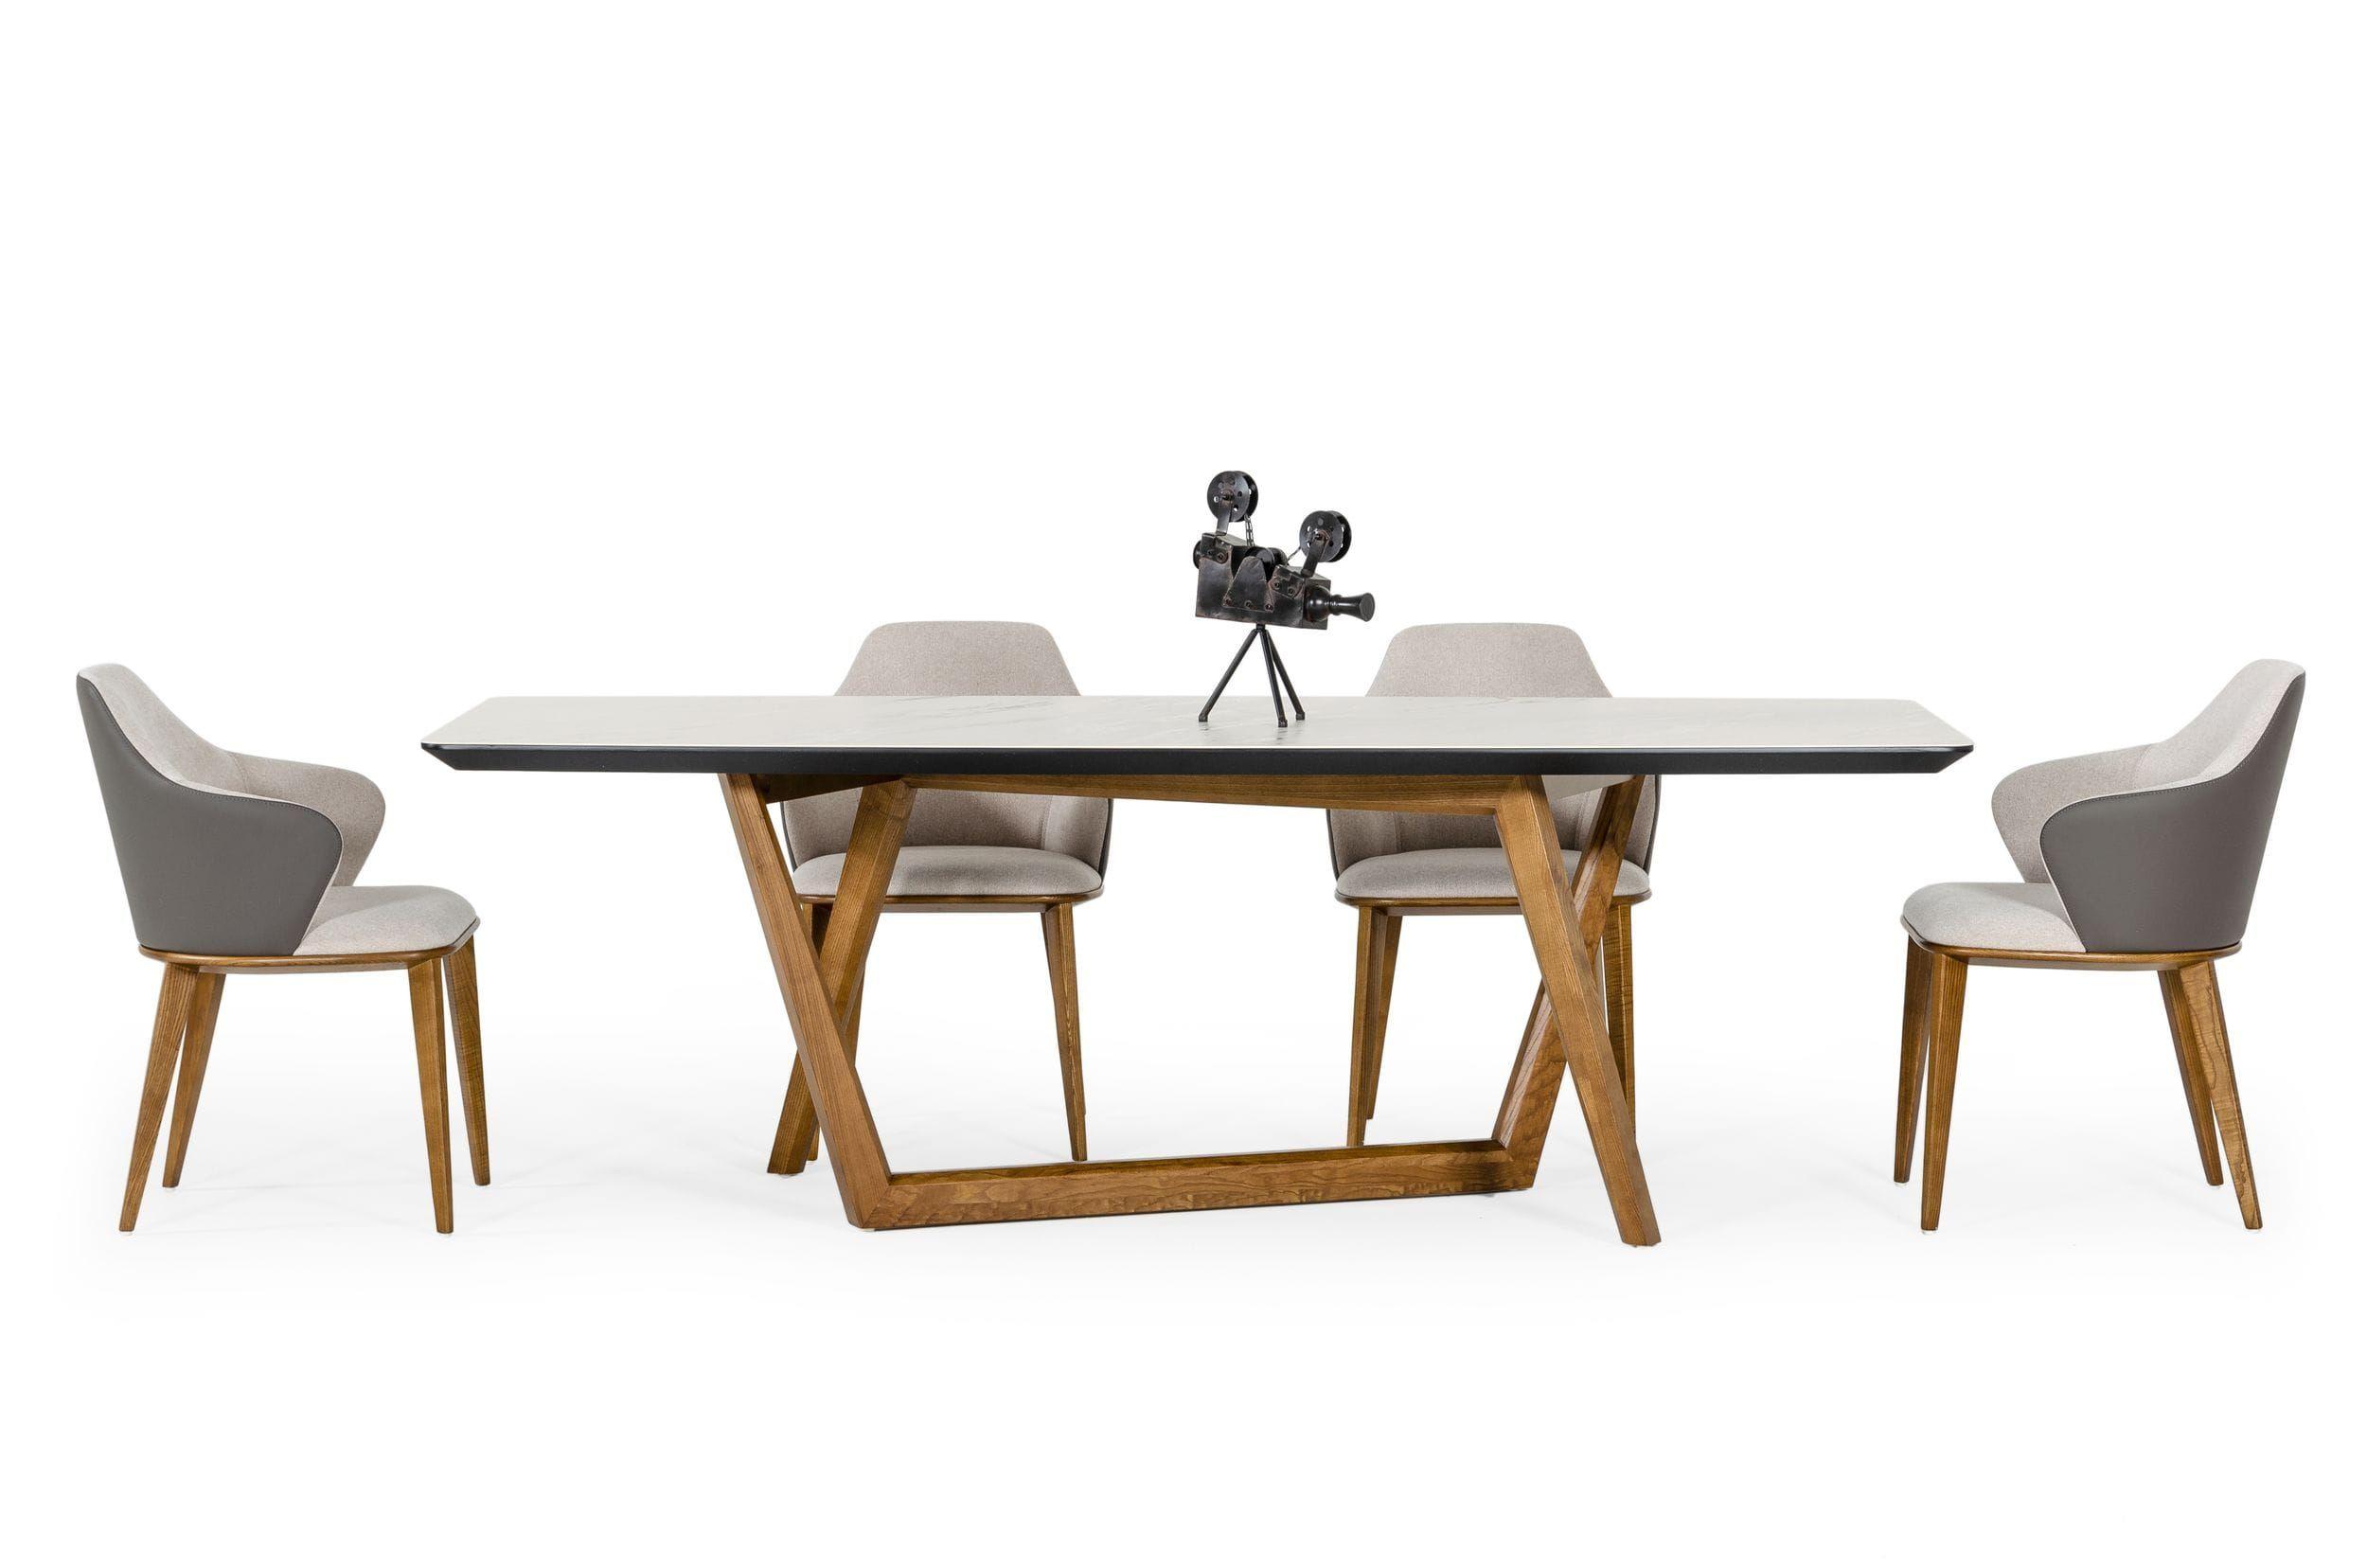 Contemporary, Modern Dining Room Set James Megan VGCSDT-19078-WAL-DT-5pcs in Walnut, Gray Leatherette